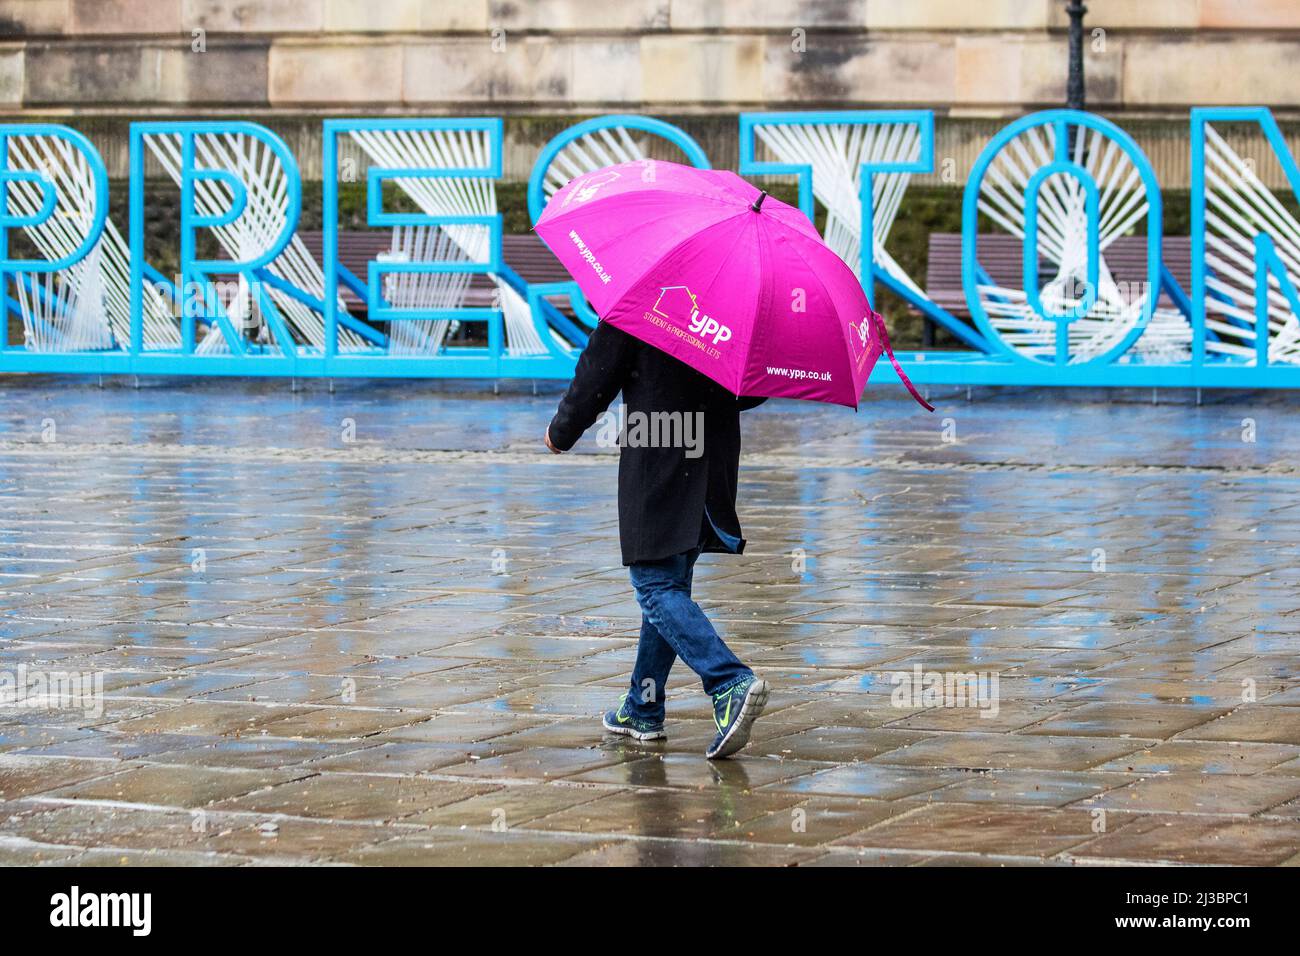 Preston, Lancashire.  UK Weather 07 April, 2022.  Strong winds and heavy downpours in Preston as temperatures drop to 7c. Shoppers getting drenched as driving rain and gale force winds dampen high street spirits.  Very windy with April showers throughout the day.  Credit: MediaWorldImages/AlamyLiveNews Stock Photo